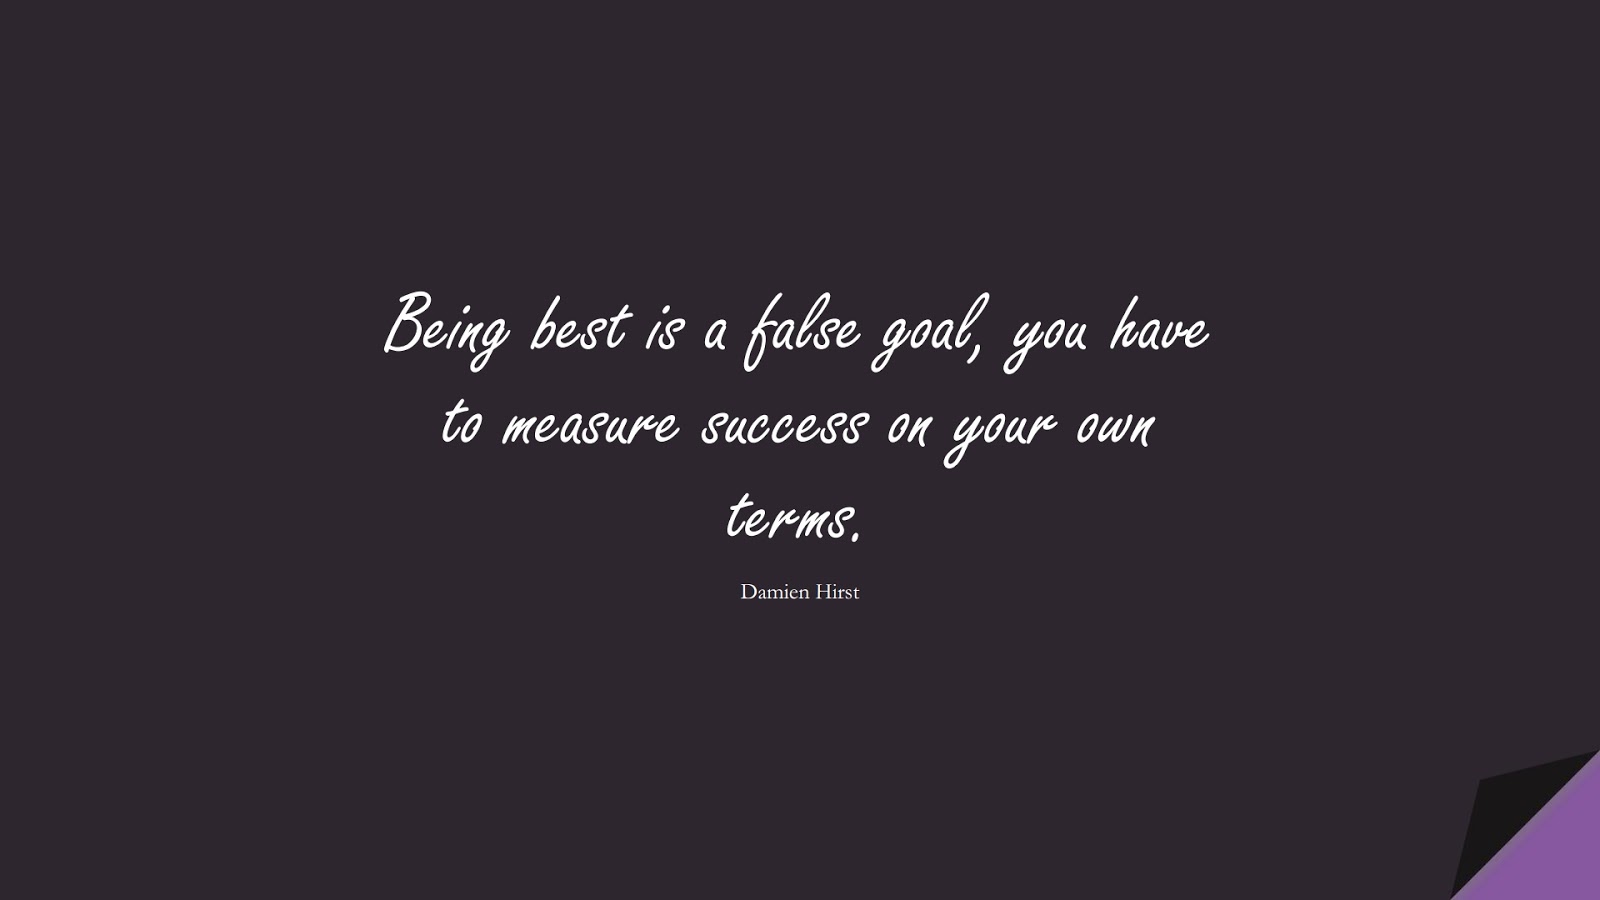 Being best is a false goal, you have to measure success on your own terms. (Damien Hirst);  #SuccessQuotes